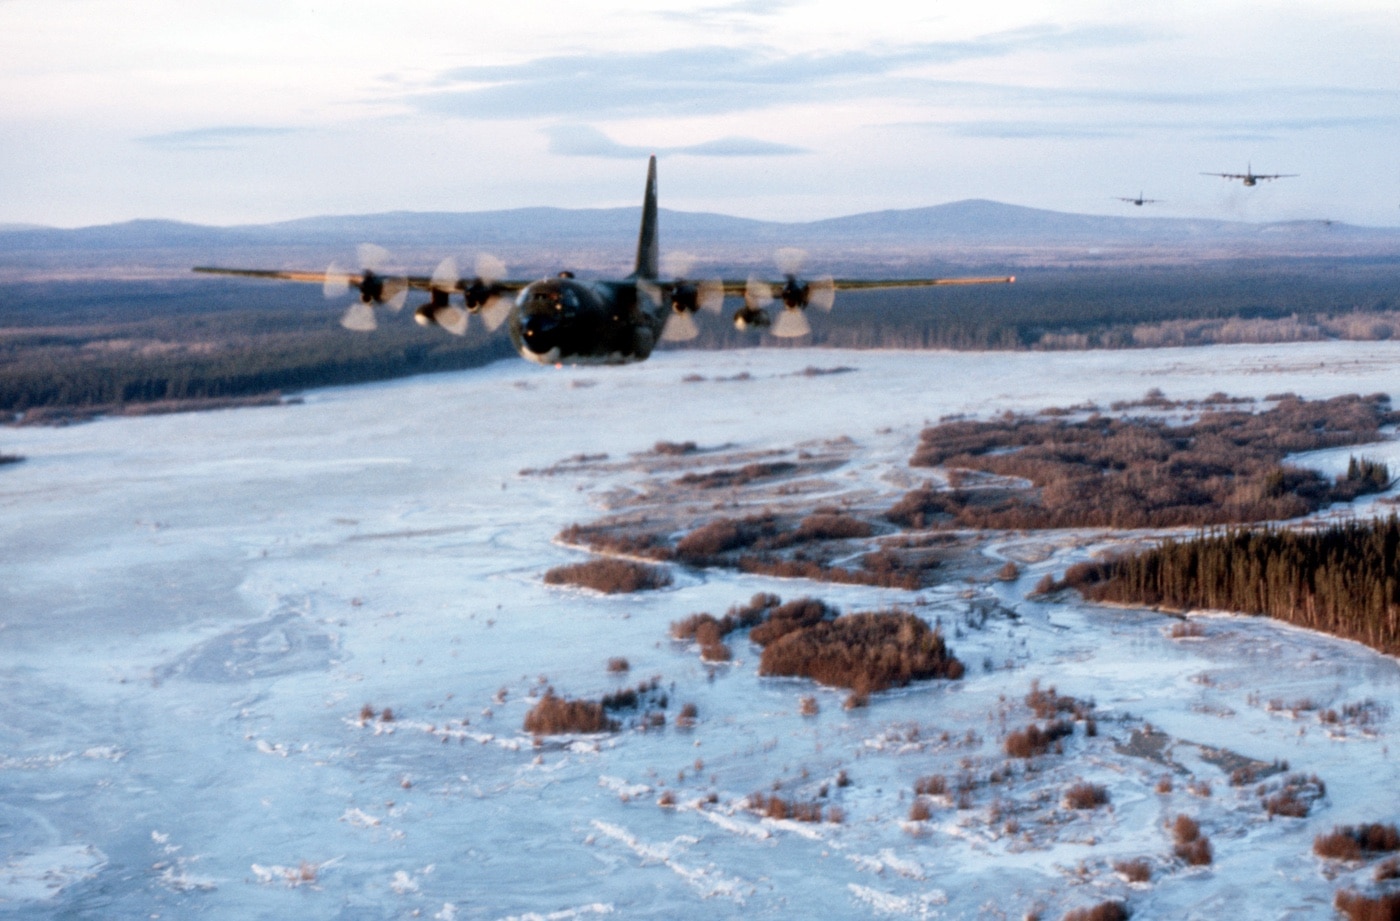 ac-130 firing range practive in exercise brim frost 1981